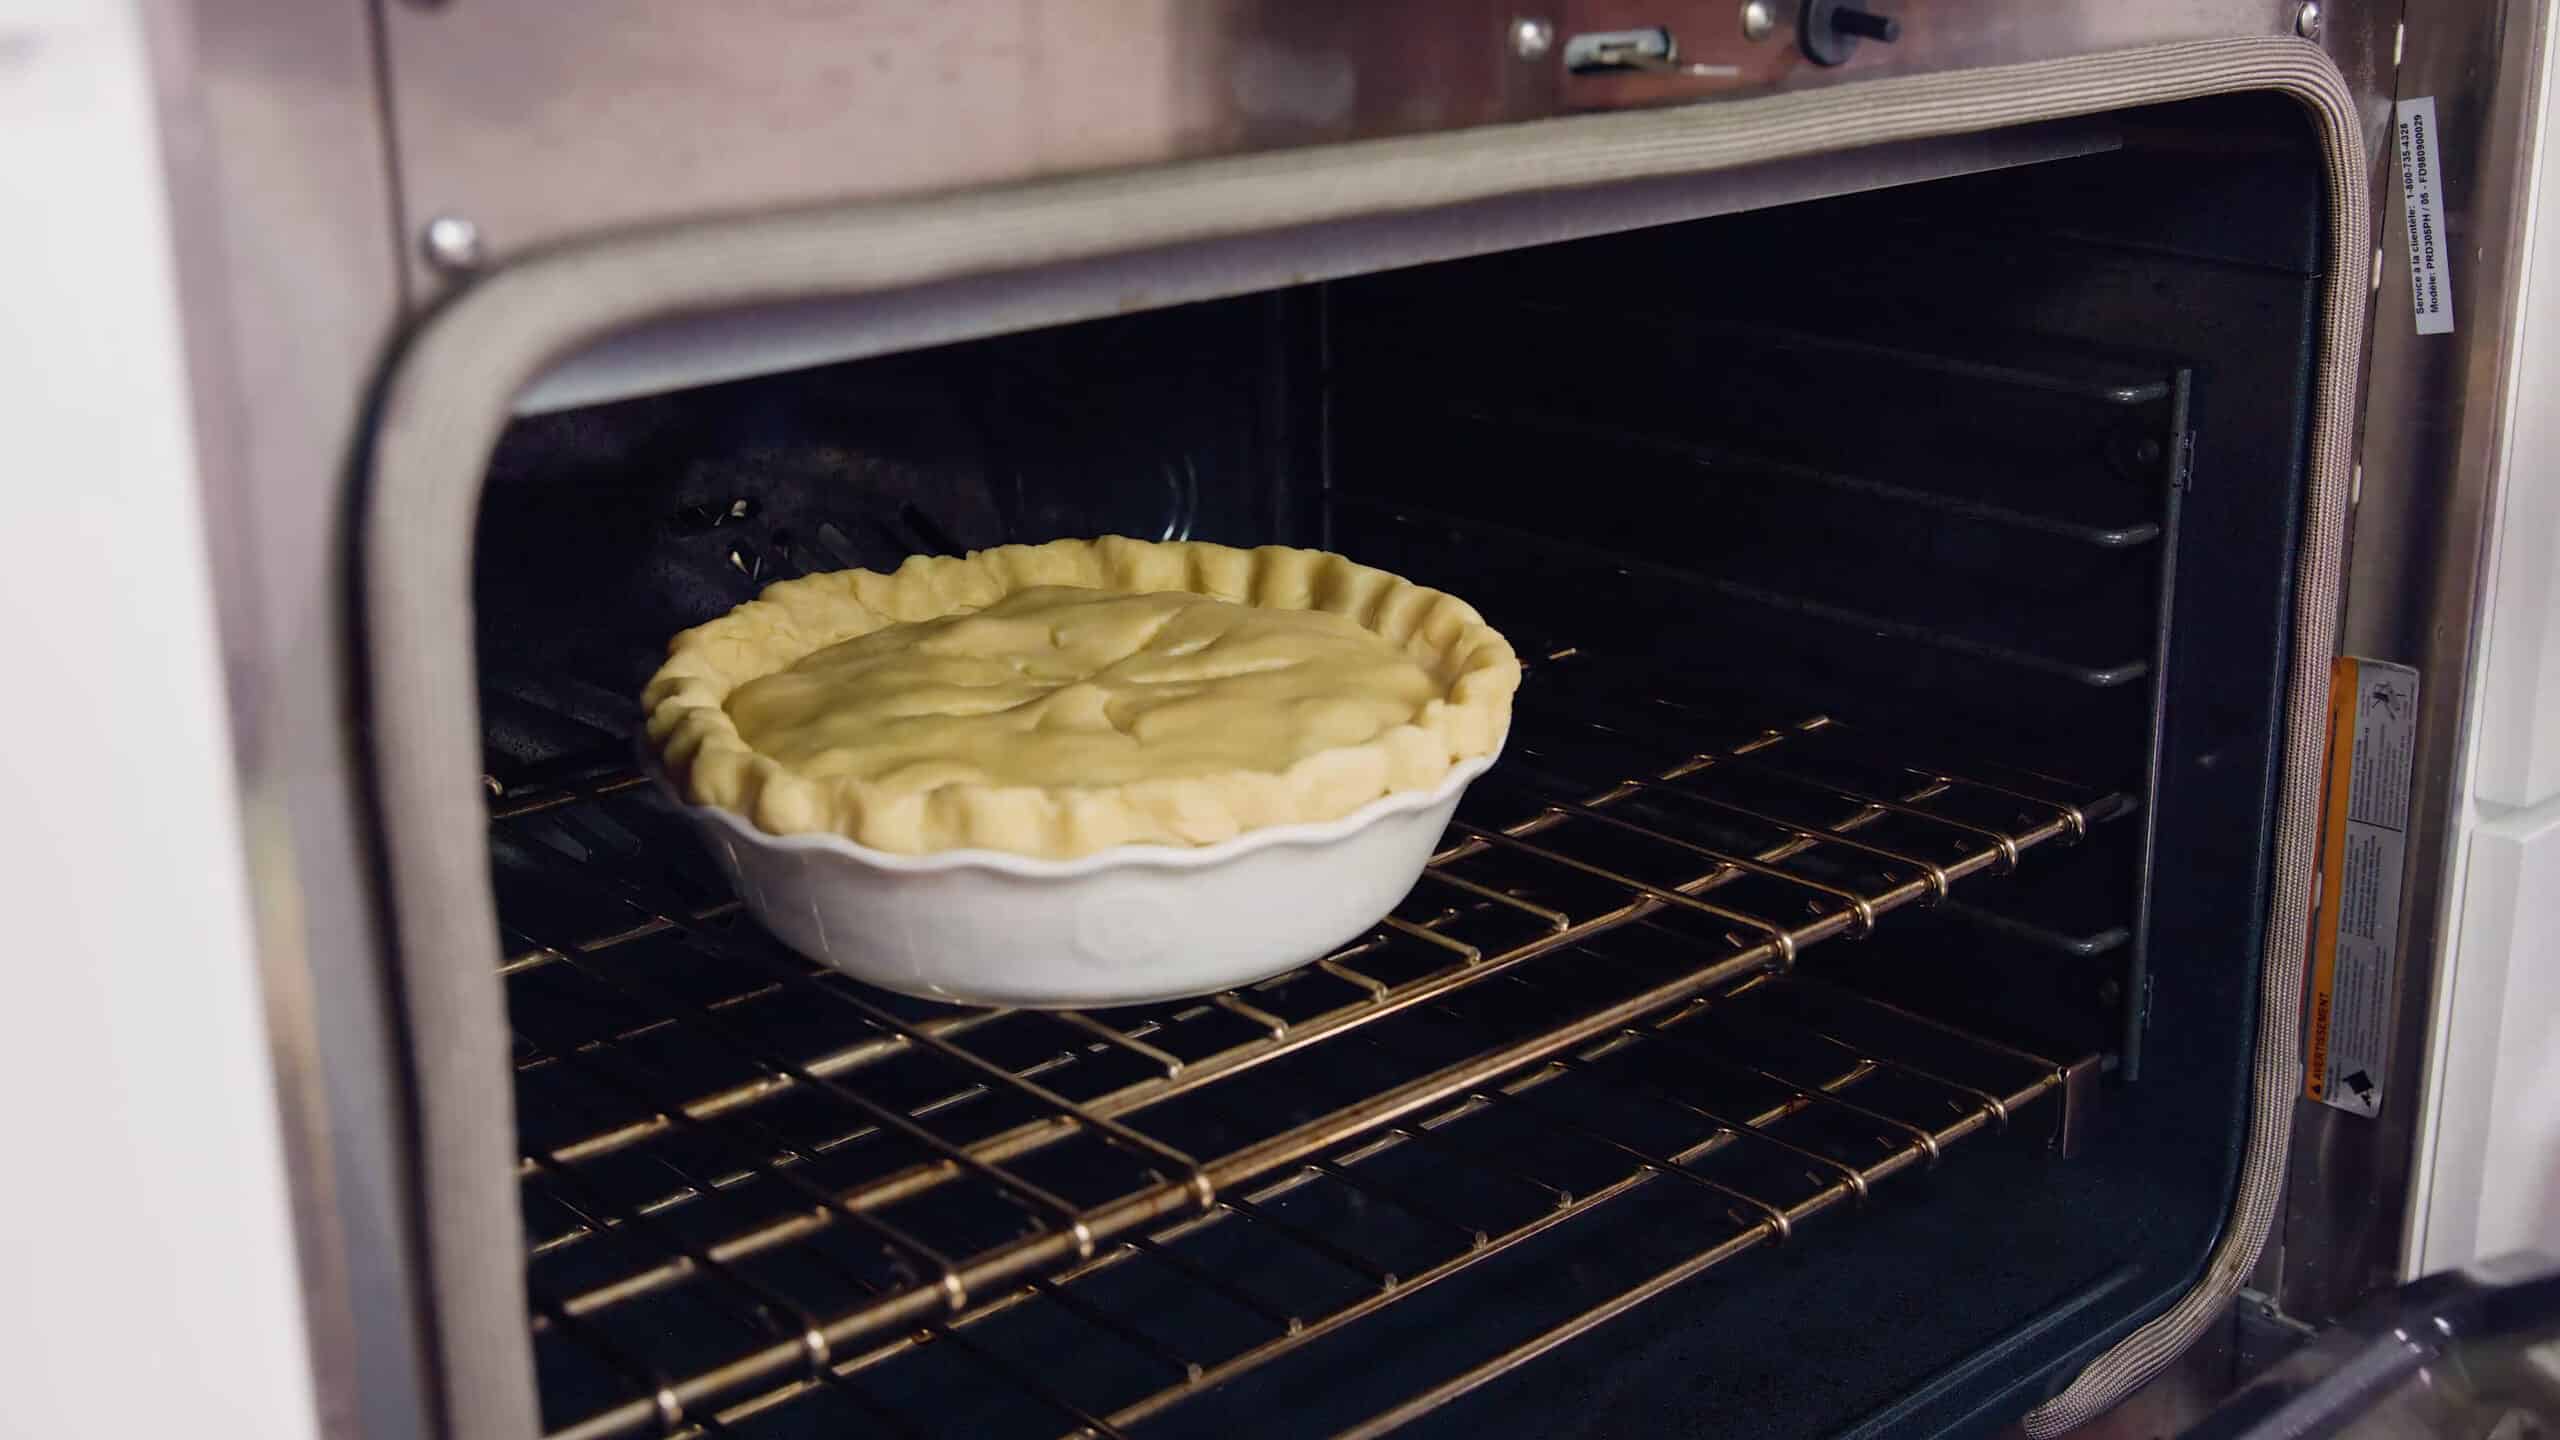 Angled view of open oven with fully prepared chicken pot pie on the rack in the middle of the oven.